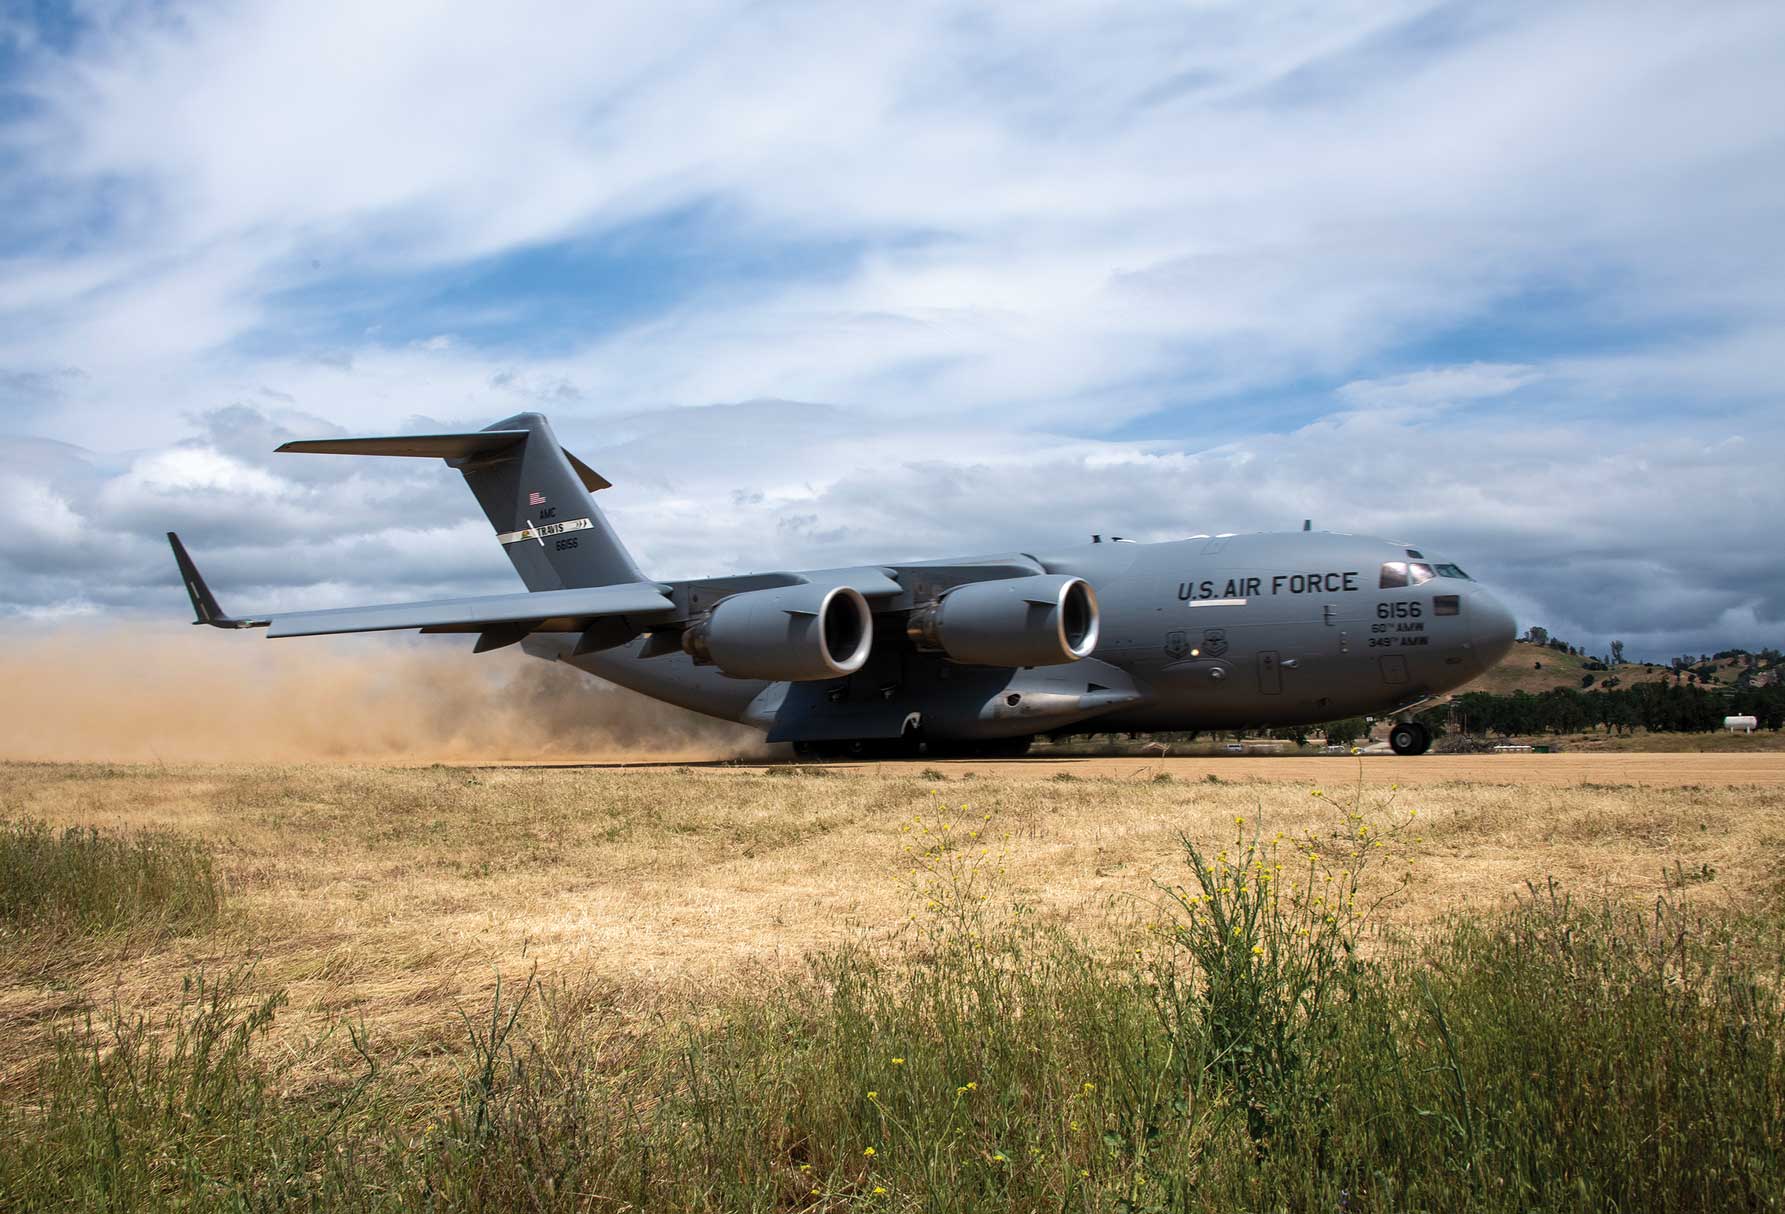 A C-17 Globemaster III participating in Exercise Golden Phoenix takes off on a dirt runway at Schoonover Airfield, CA, May 9, 2023. Golden Phoenix is a large-scale readiness exercise hosted by Travis Air Force Base with full spectrum support from partner units.